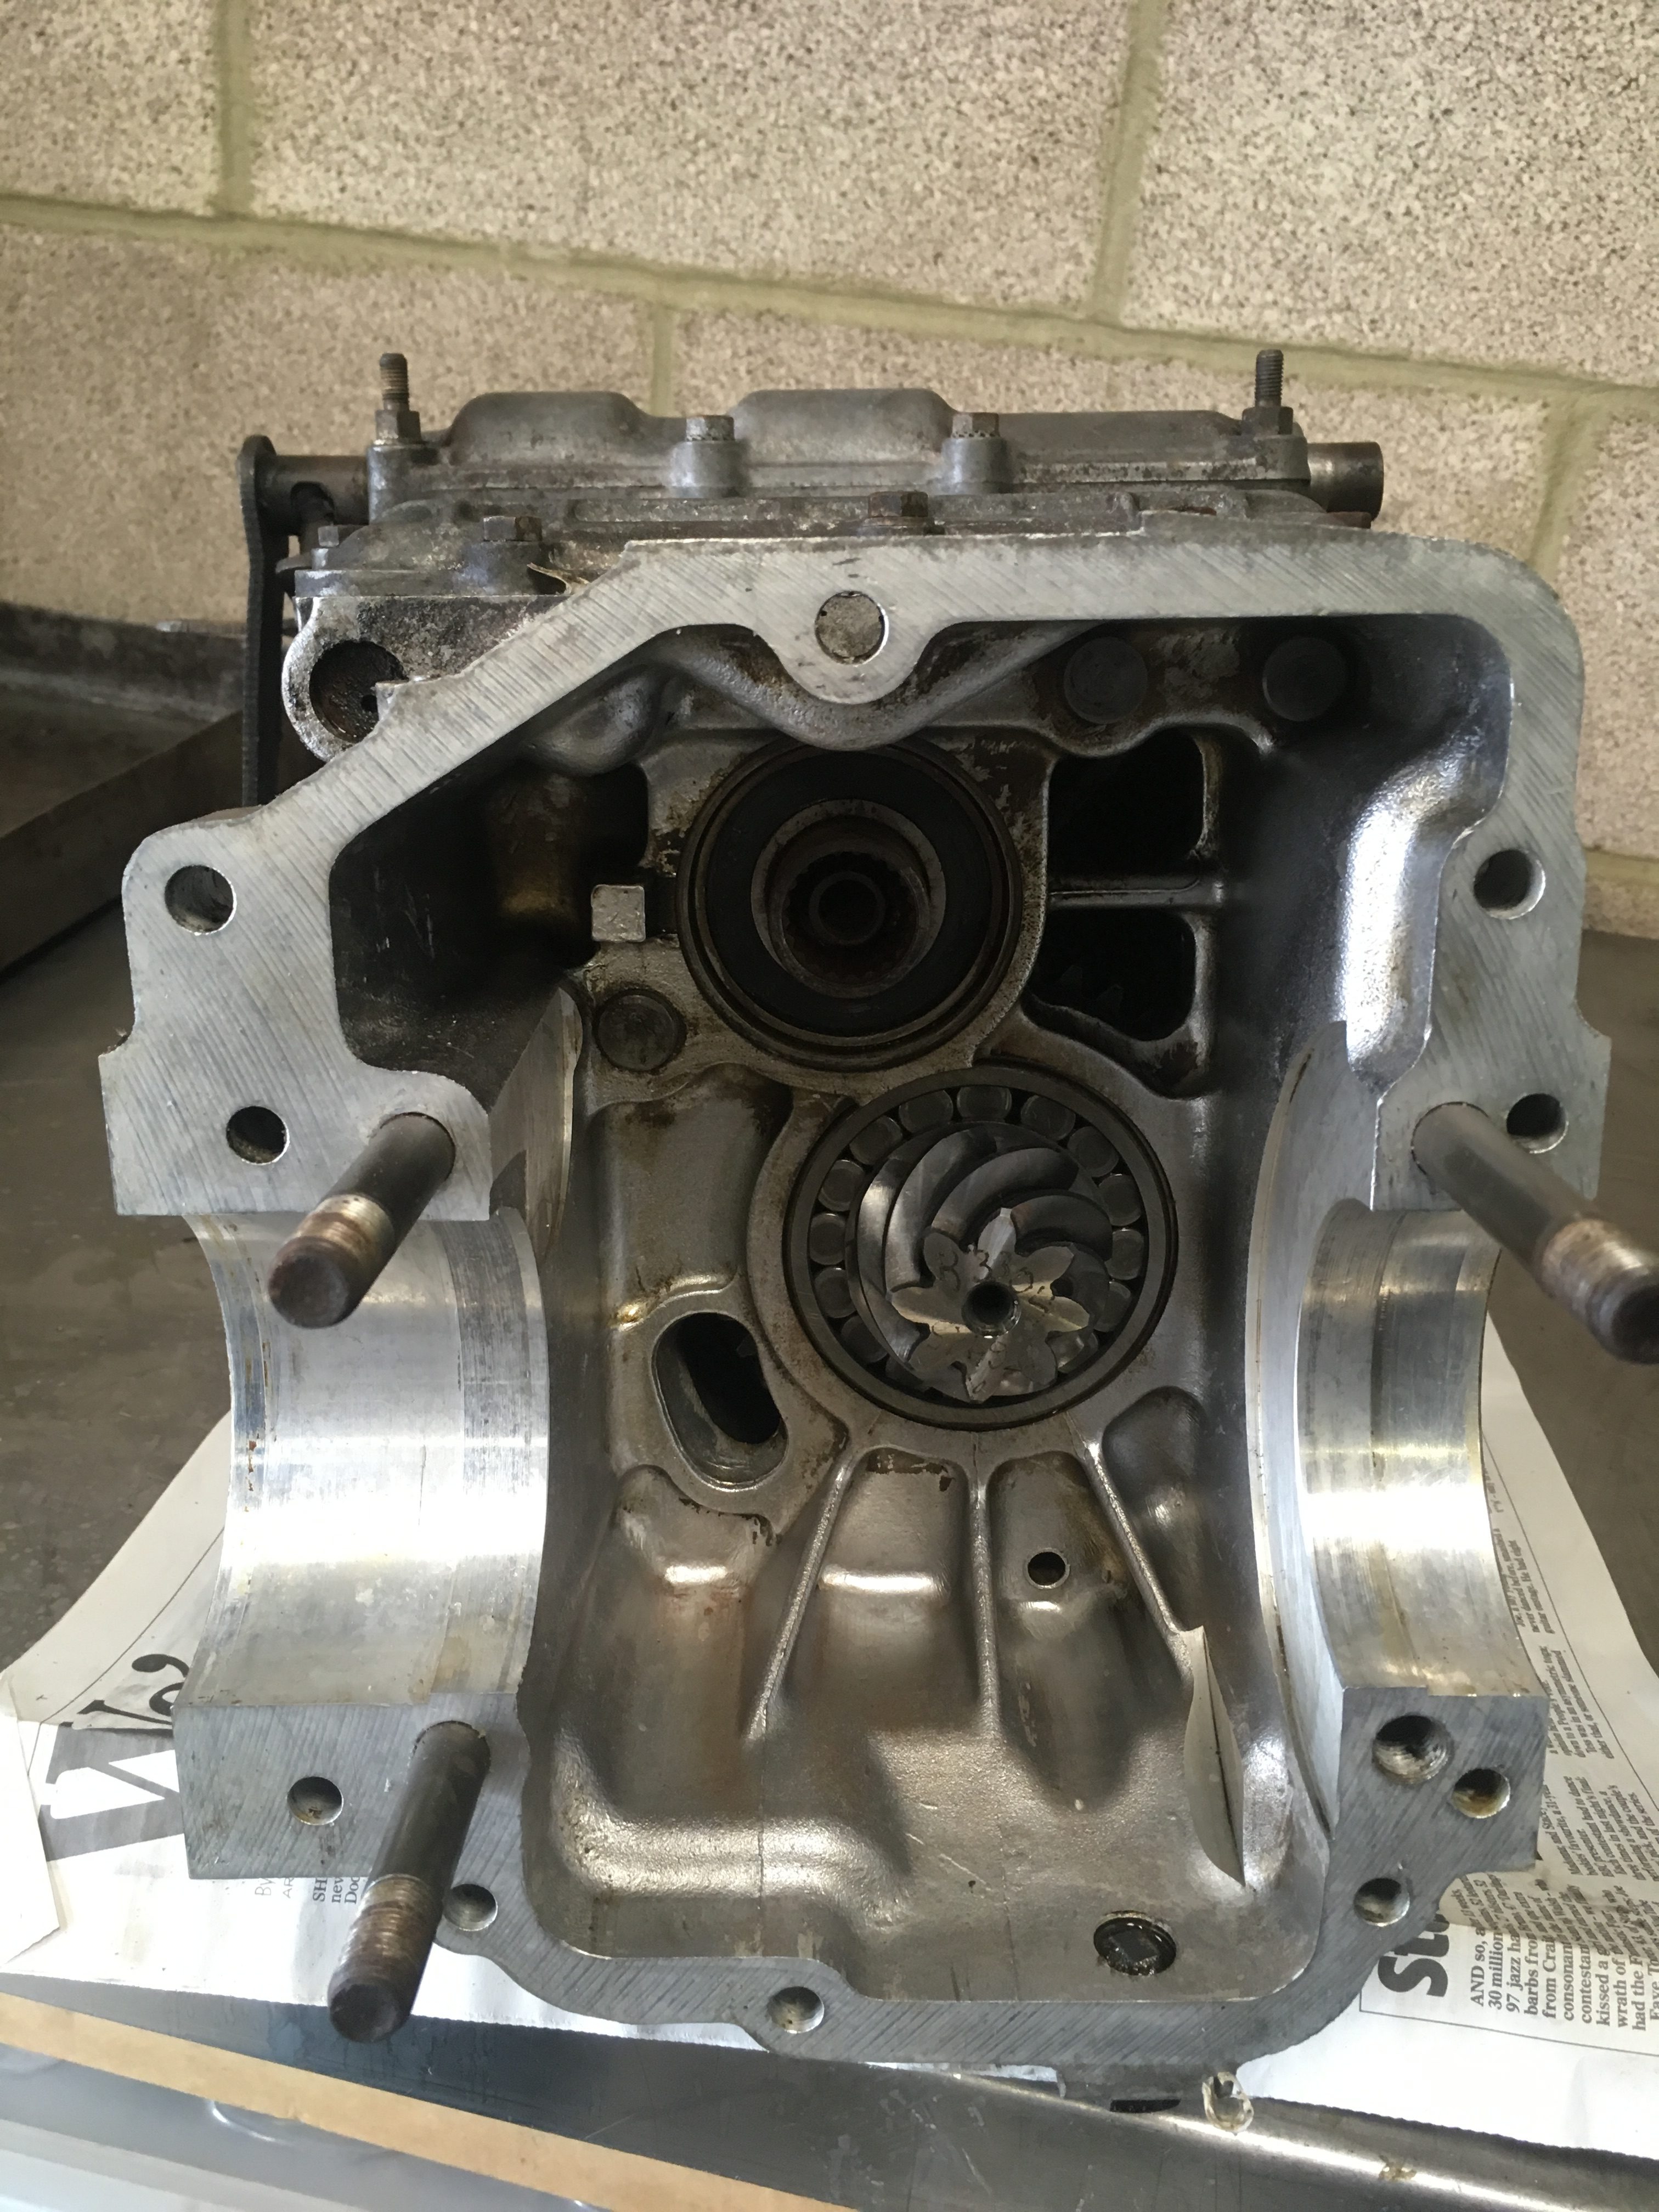 Lotus Esprit S3 Citroen gearbox input shaft replacement bell housing and diff removed - Esprit Engineering gearbox rebuilding service- S1 S2 S3 S3 Turbo